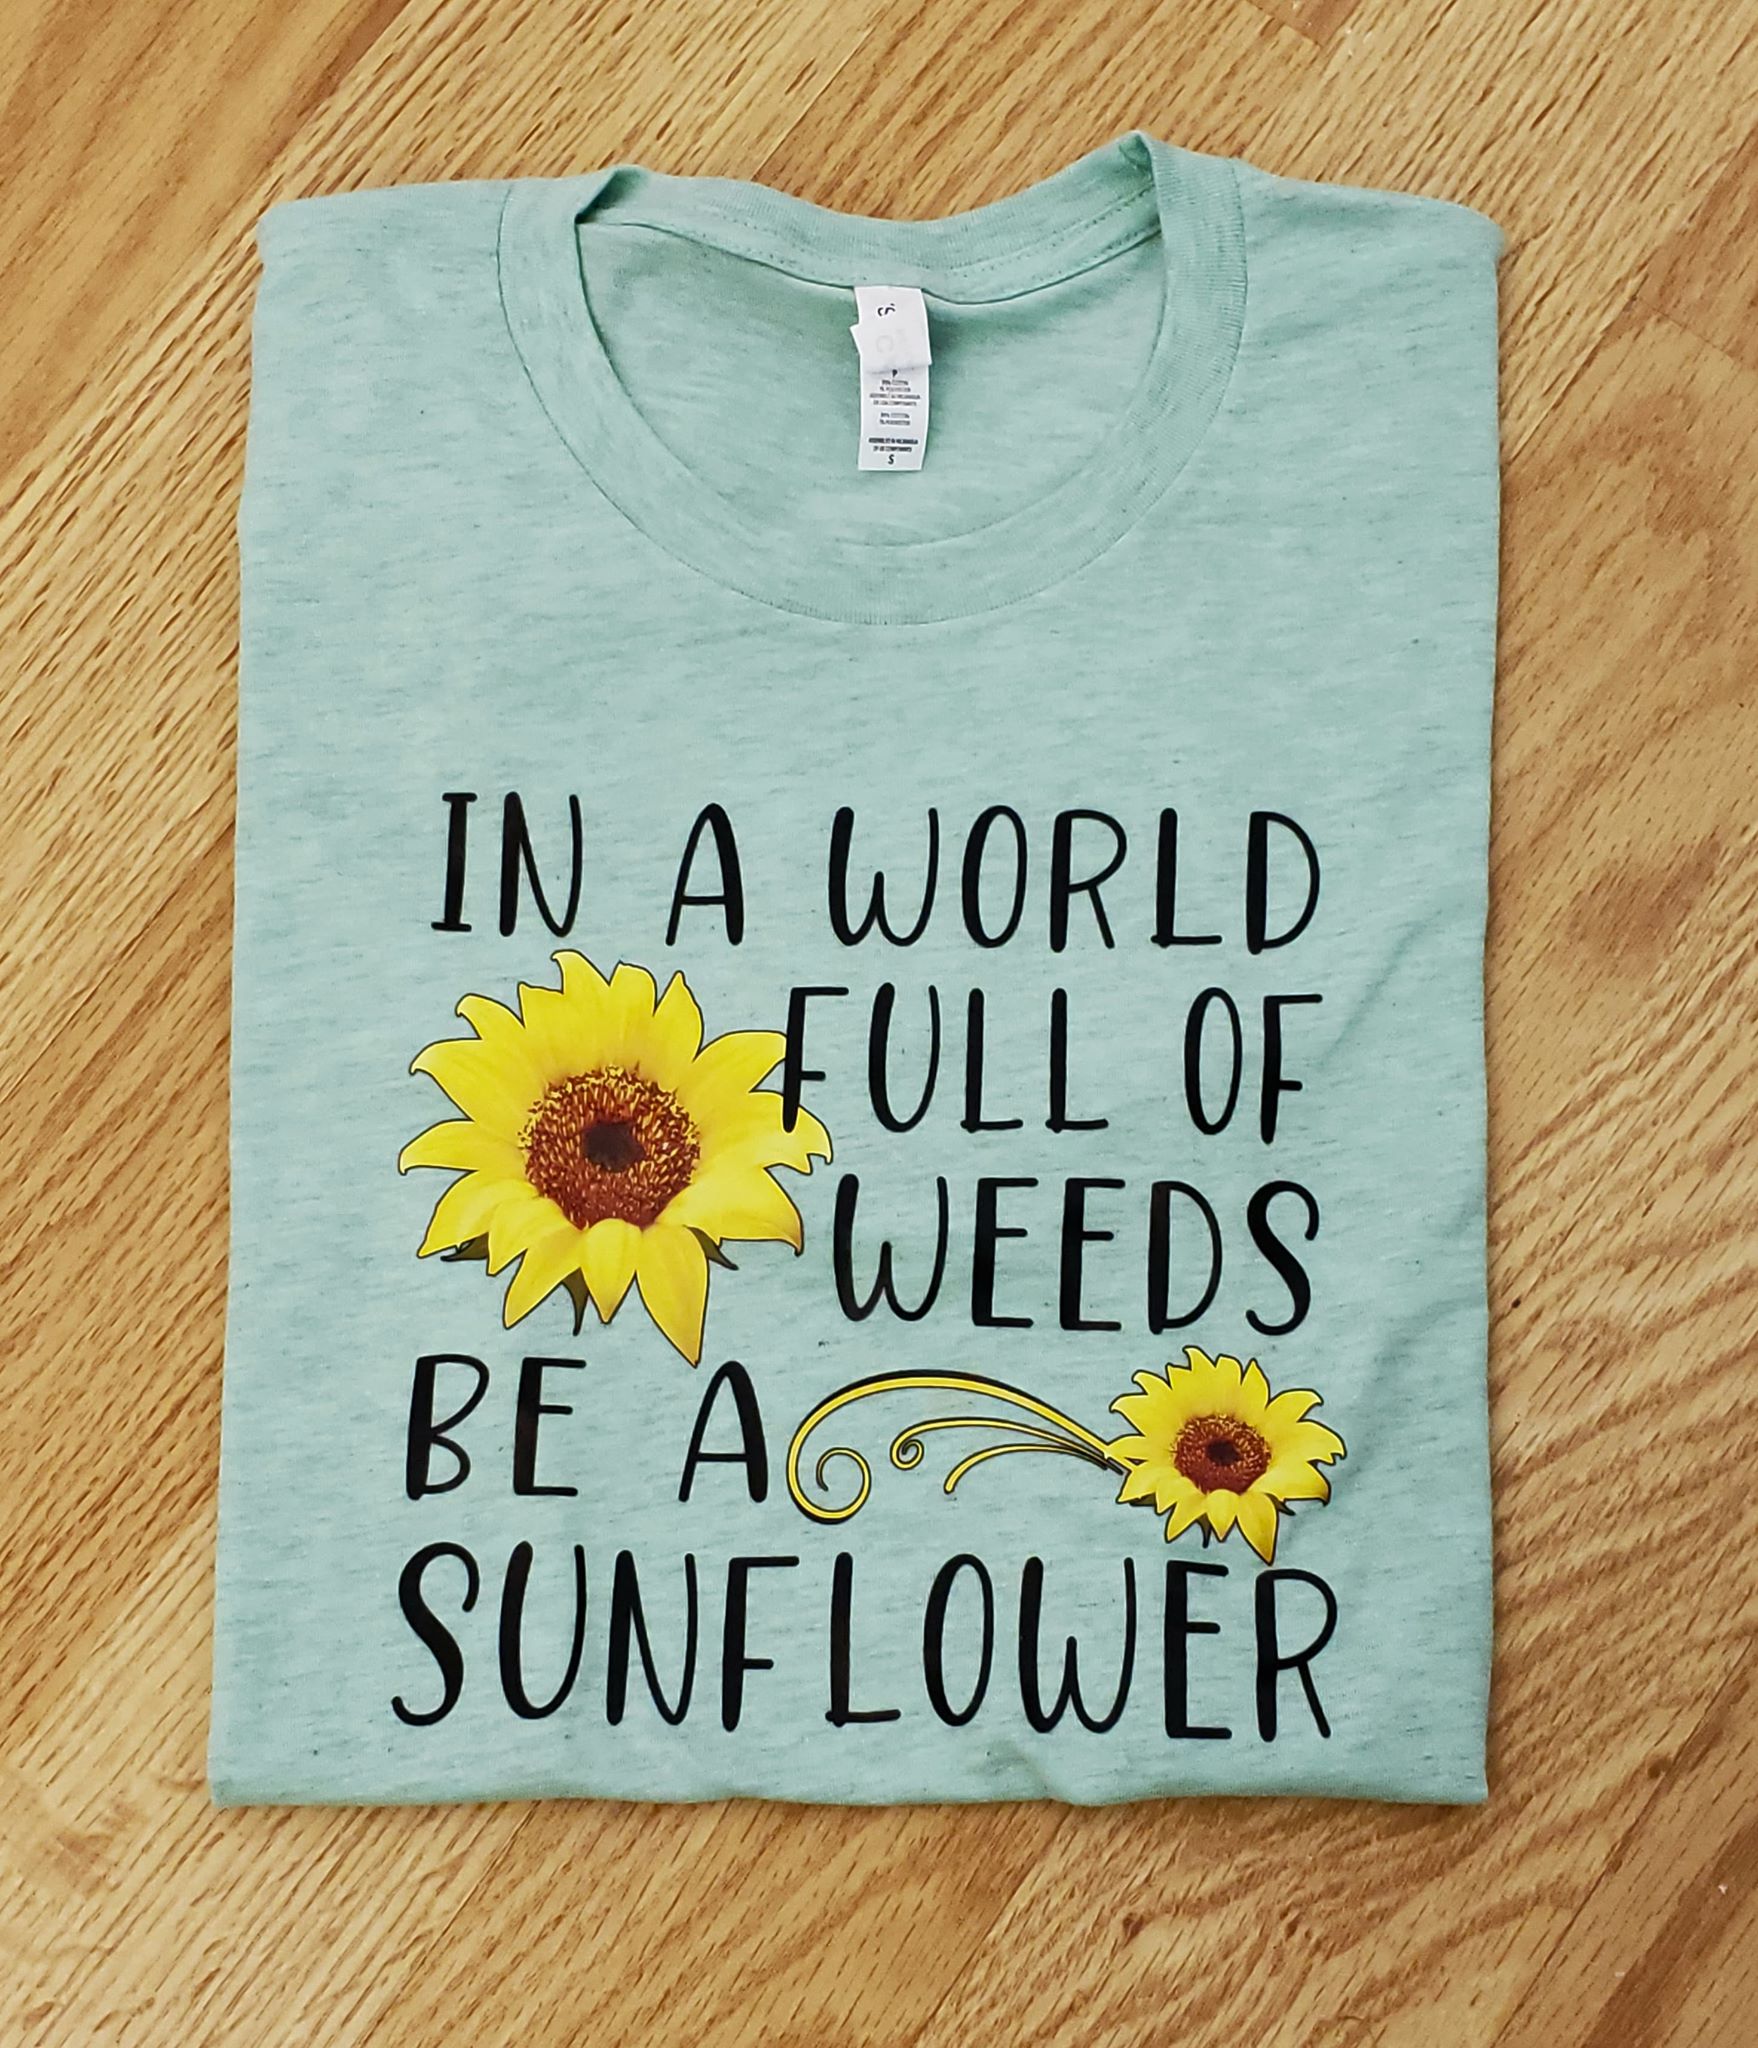 In a world full of weeds be a sunflower - Heat Transfer (screen print)